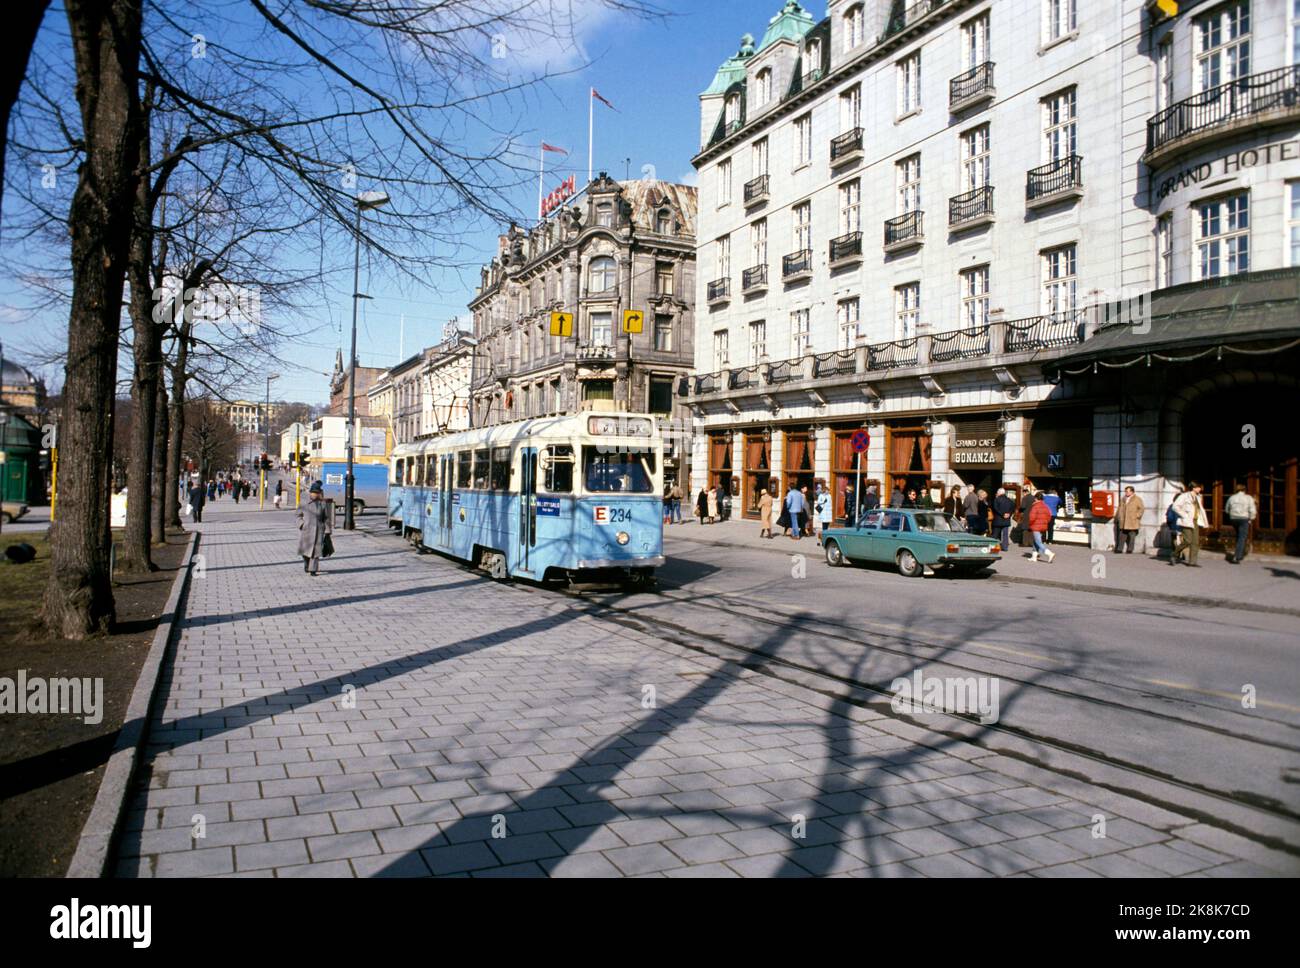 Oslo 1983-03: Last tram on Karl Johan. Restructuring of the tram routes in Oslo. The tram goes here for the last time (last day) up through Karl Johans gate in downtown Oslo, March 23, 1983. Here, a tram on the tram route 11 (Kjelsåstrikken) passes the Grand Hotel and Restaurant Grand Café / Bonanza. At the end of the street, the castle was glimpsed. Photo: Henrik Laurvik / NTB Stock Photo